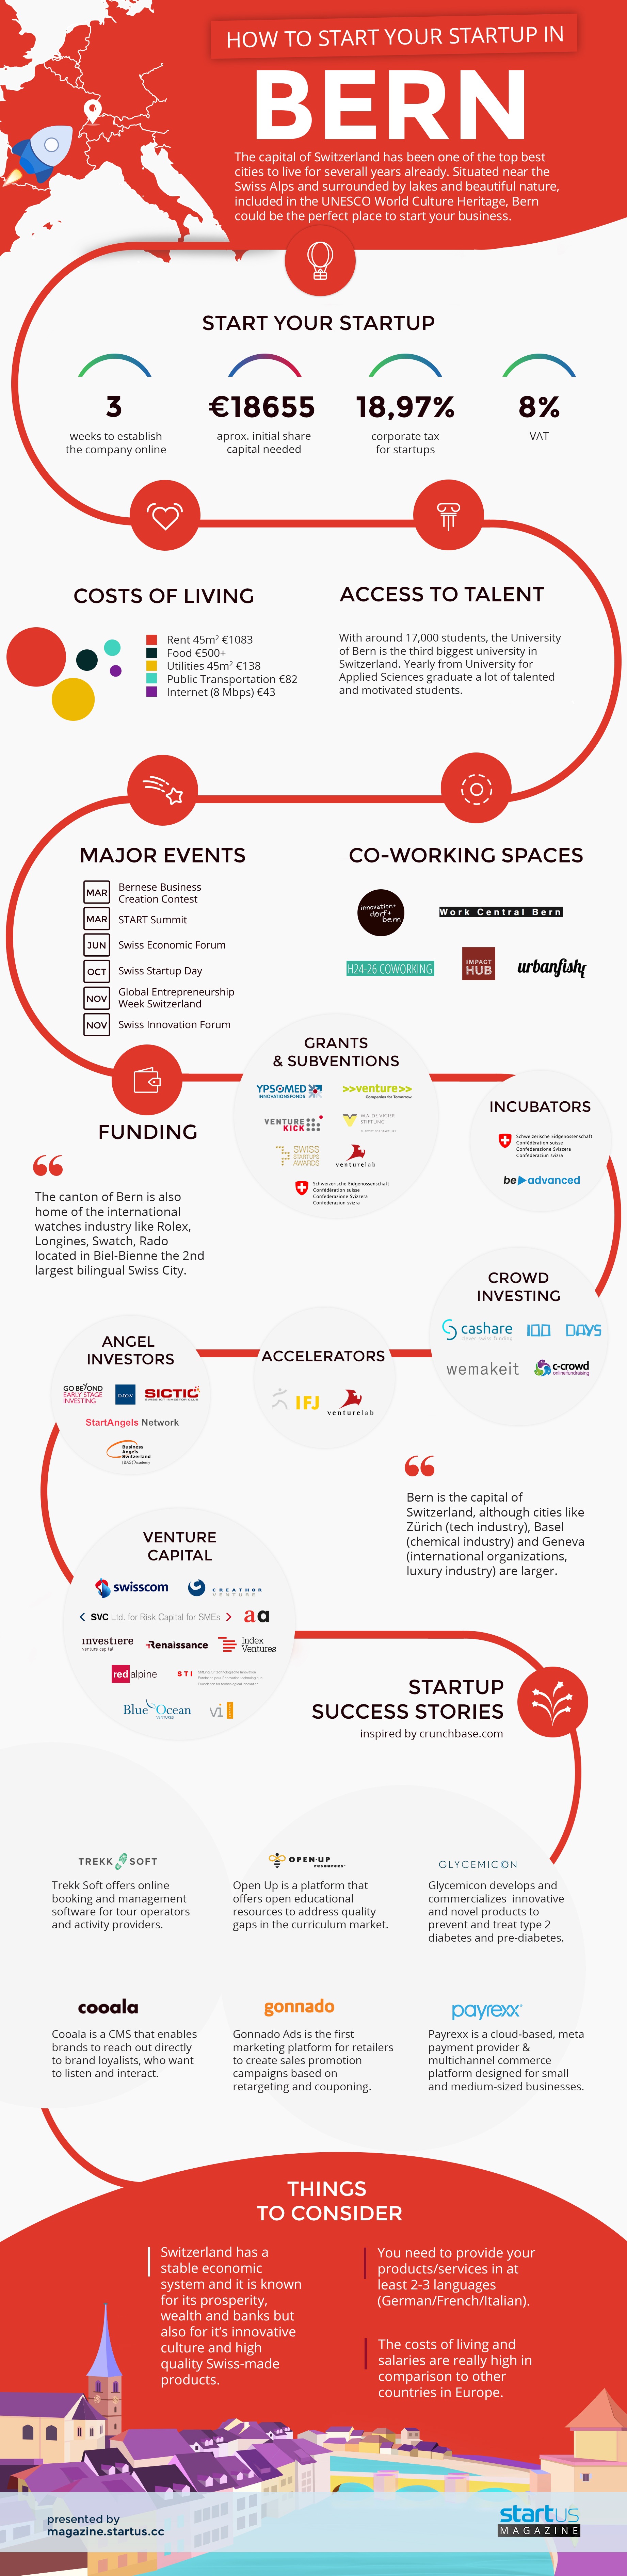 Infographic: How To Start Your Startup In Bern